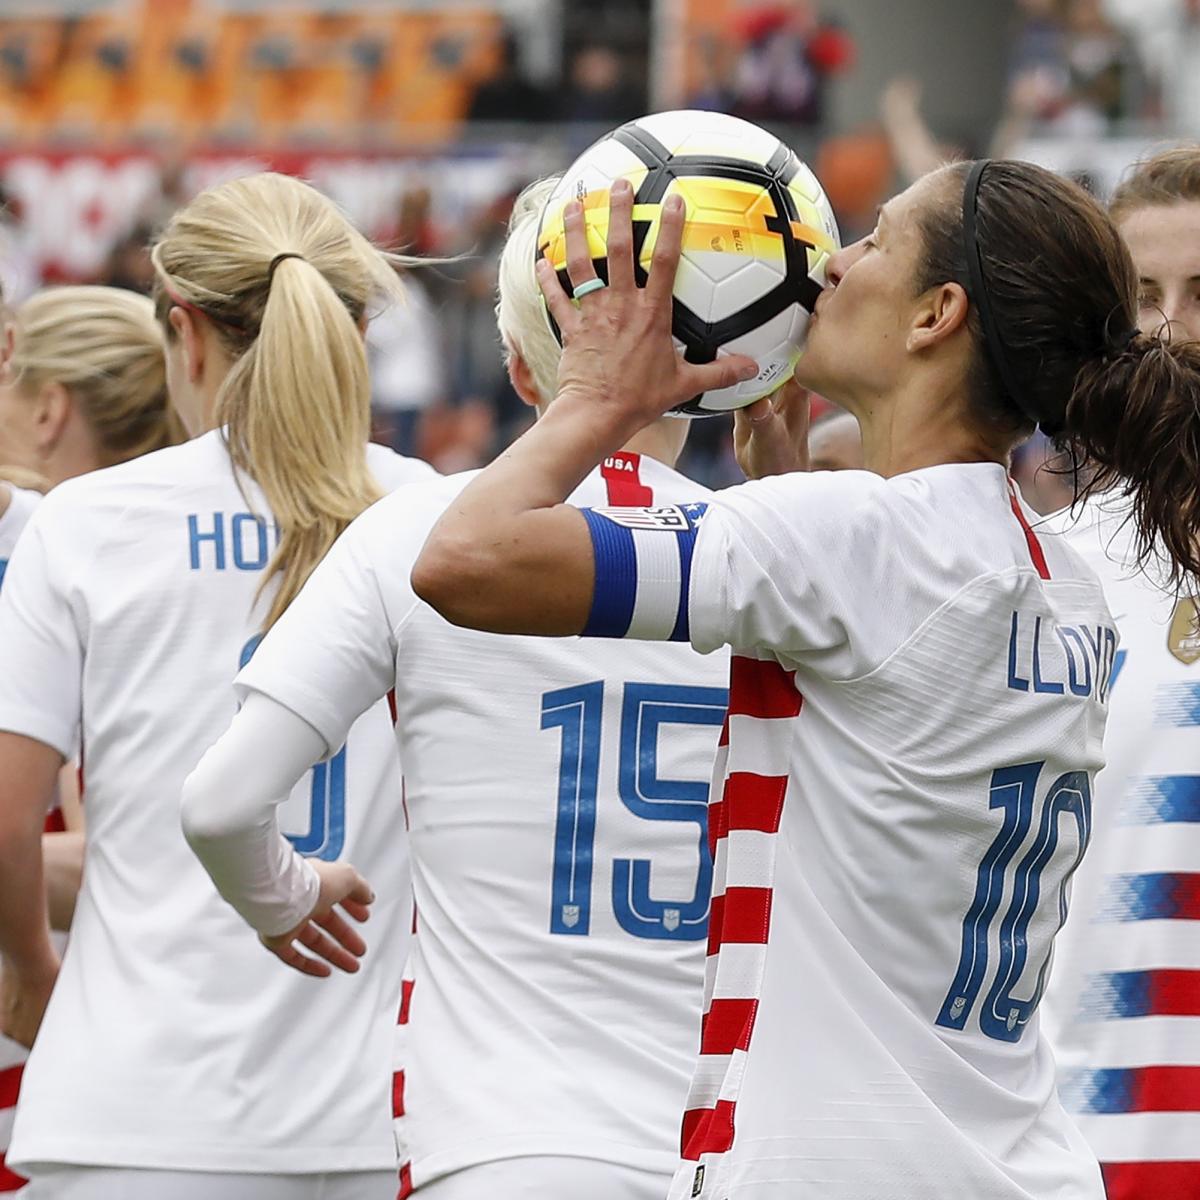 USA vs. Japan Women's Soccer: Date, Time, Live Stream and Predictions